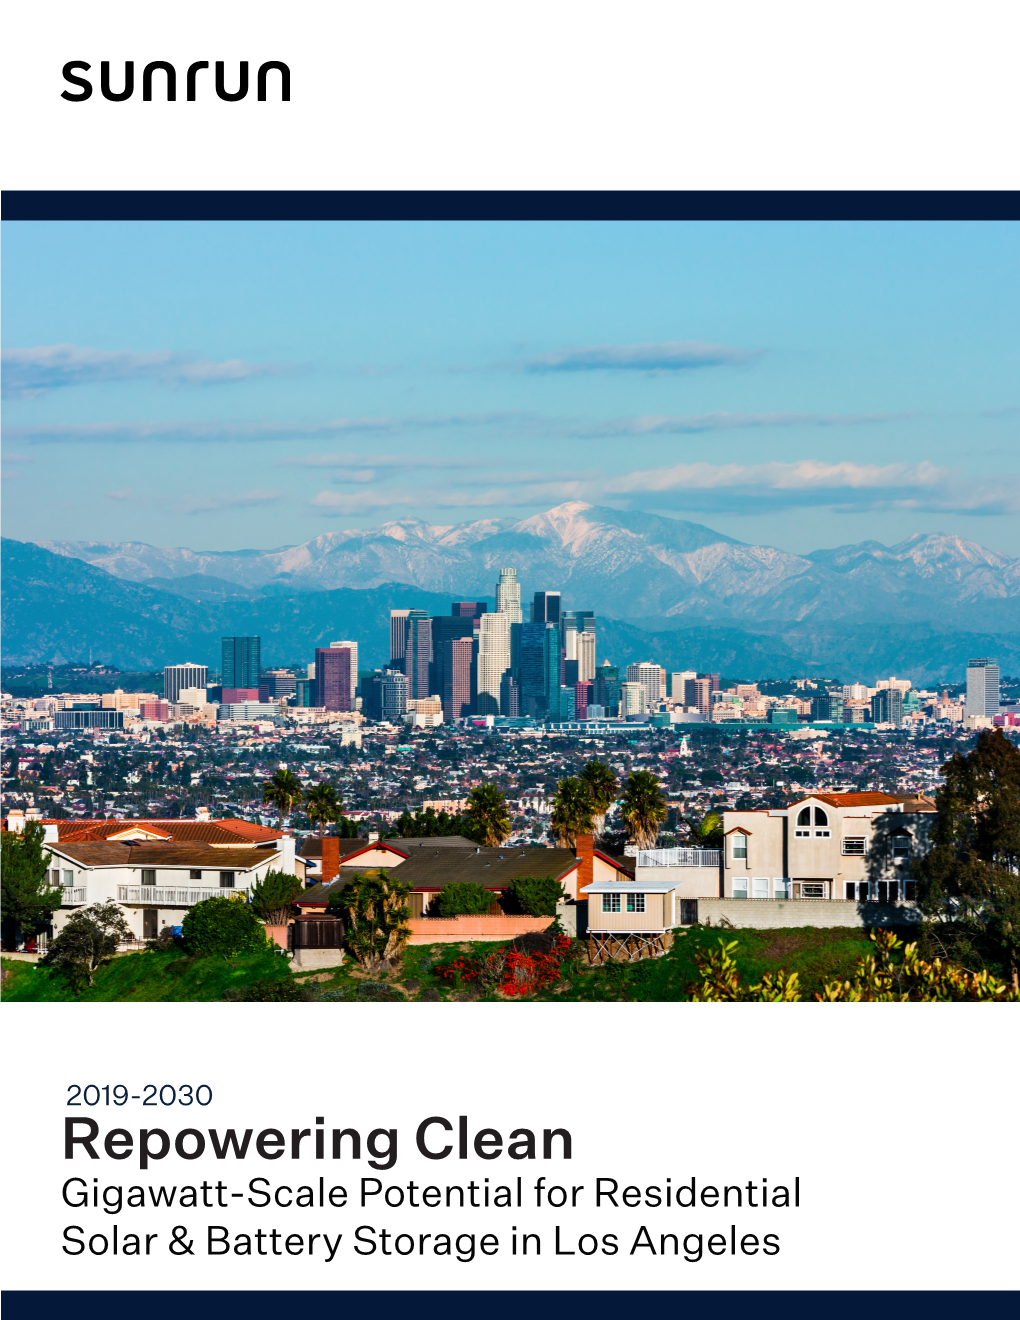 Repowering Clean Gigawatt-Scale Potential for Residential Solar & Battery Storage in Los Angeles